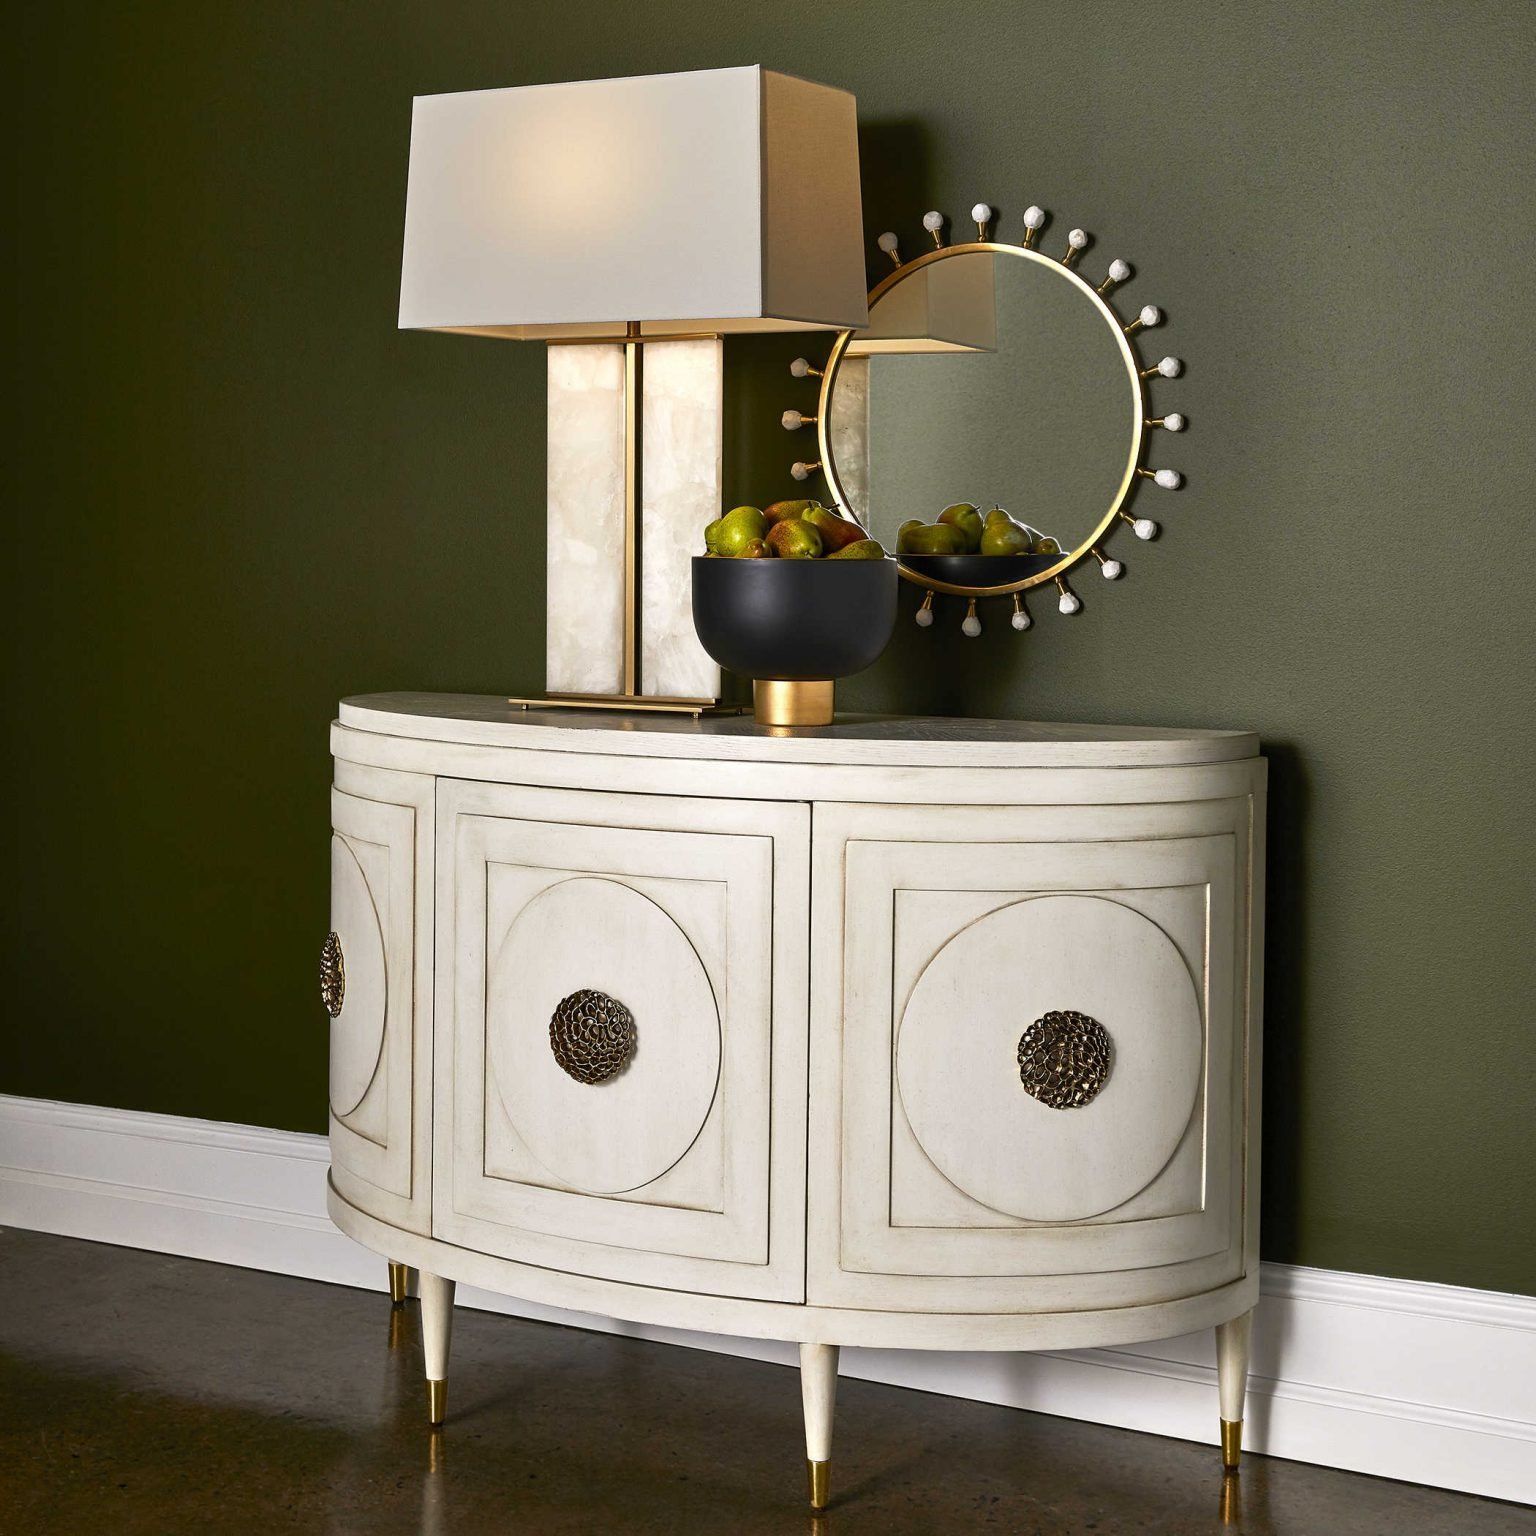 Vintage console table with geometric shapes fits in perfectly with the granny chic interior decor trend